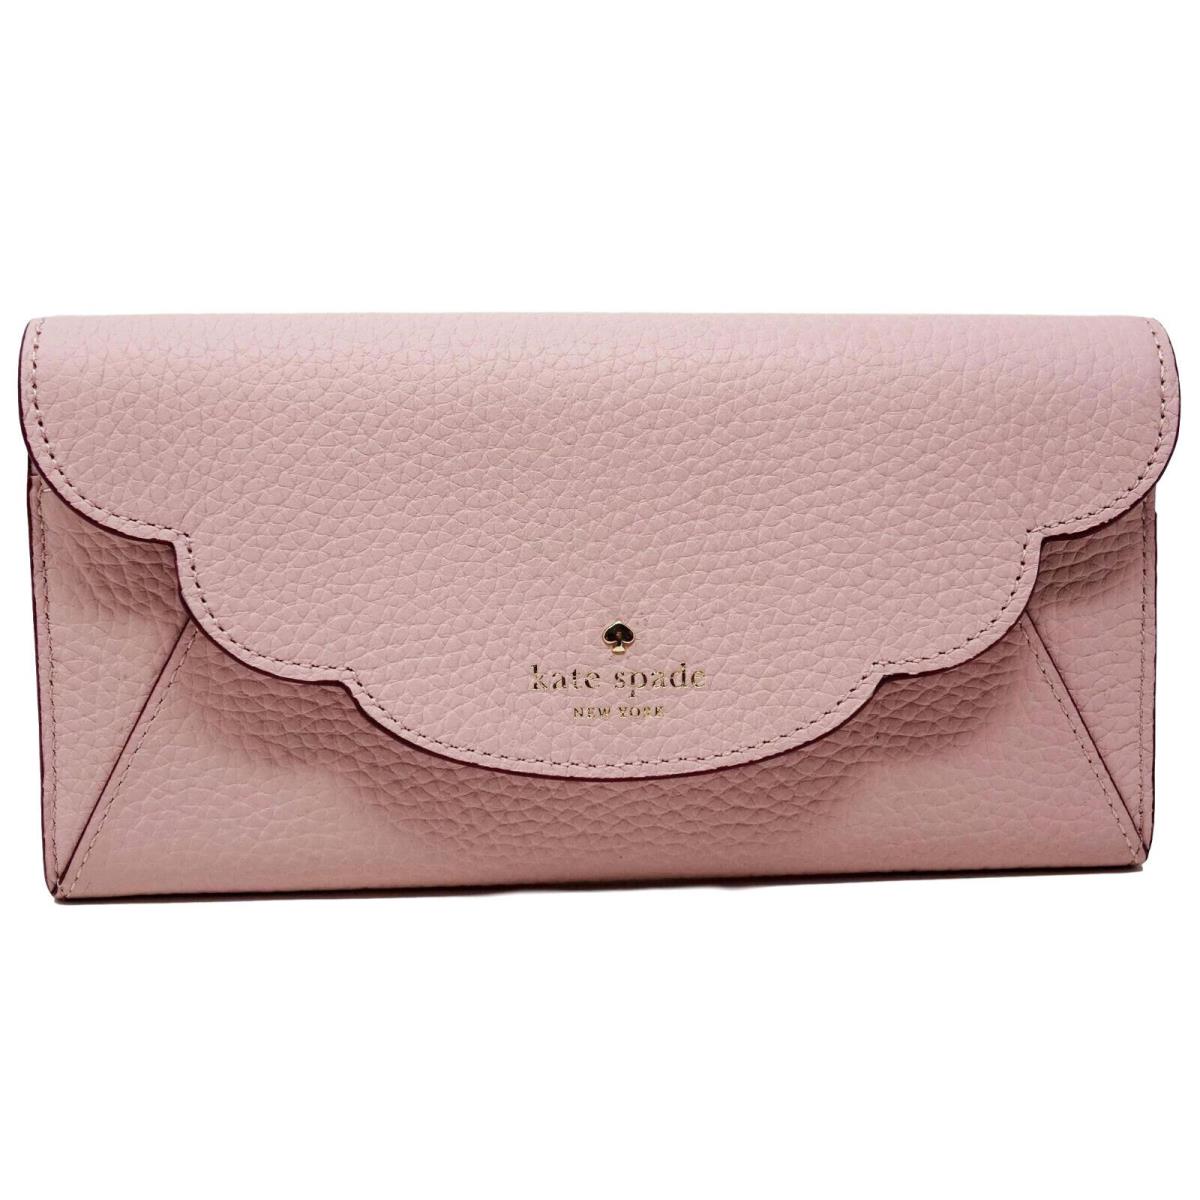 New Kate Spade Women`s Light Pink Pebbled Leather Large Organizer Wallet